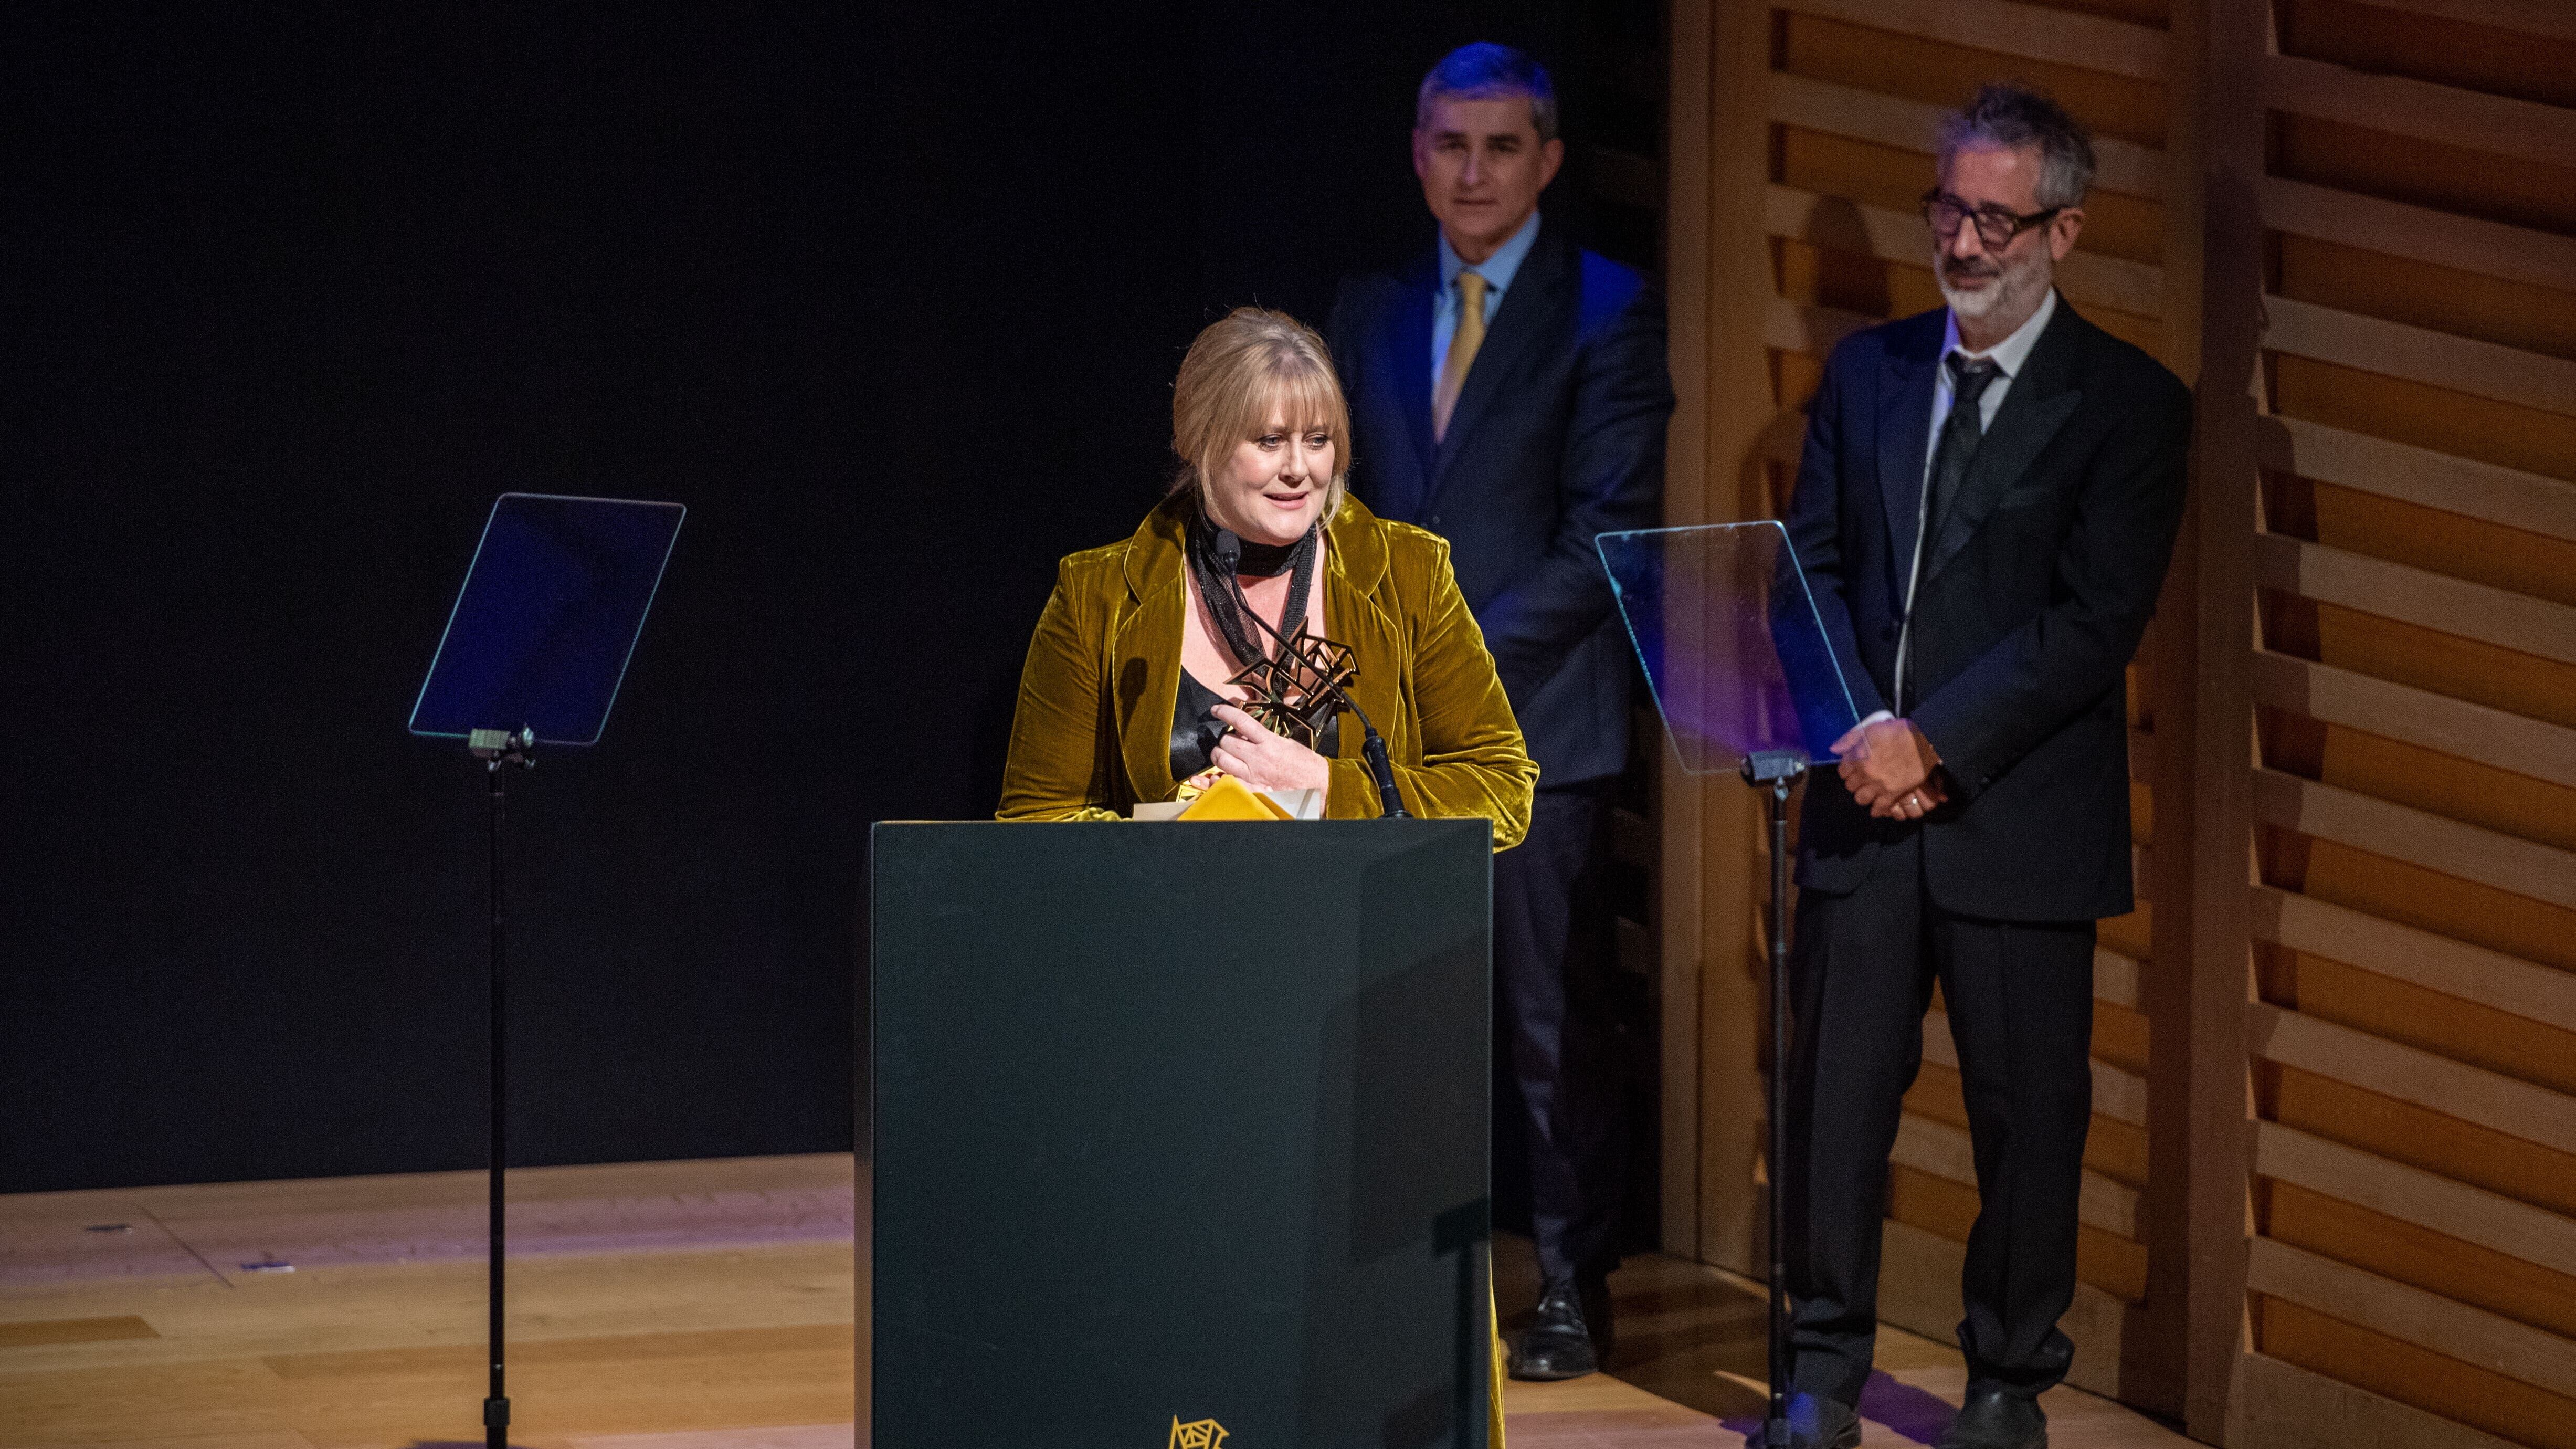 Performance of the year winner Sarah Lancashire from Happy Valley (Olly Hassell/C21 Media Content London/PA)